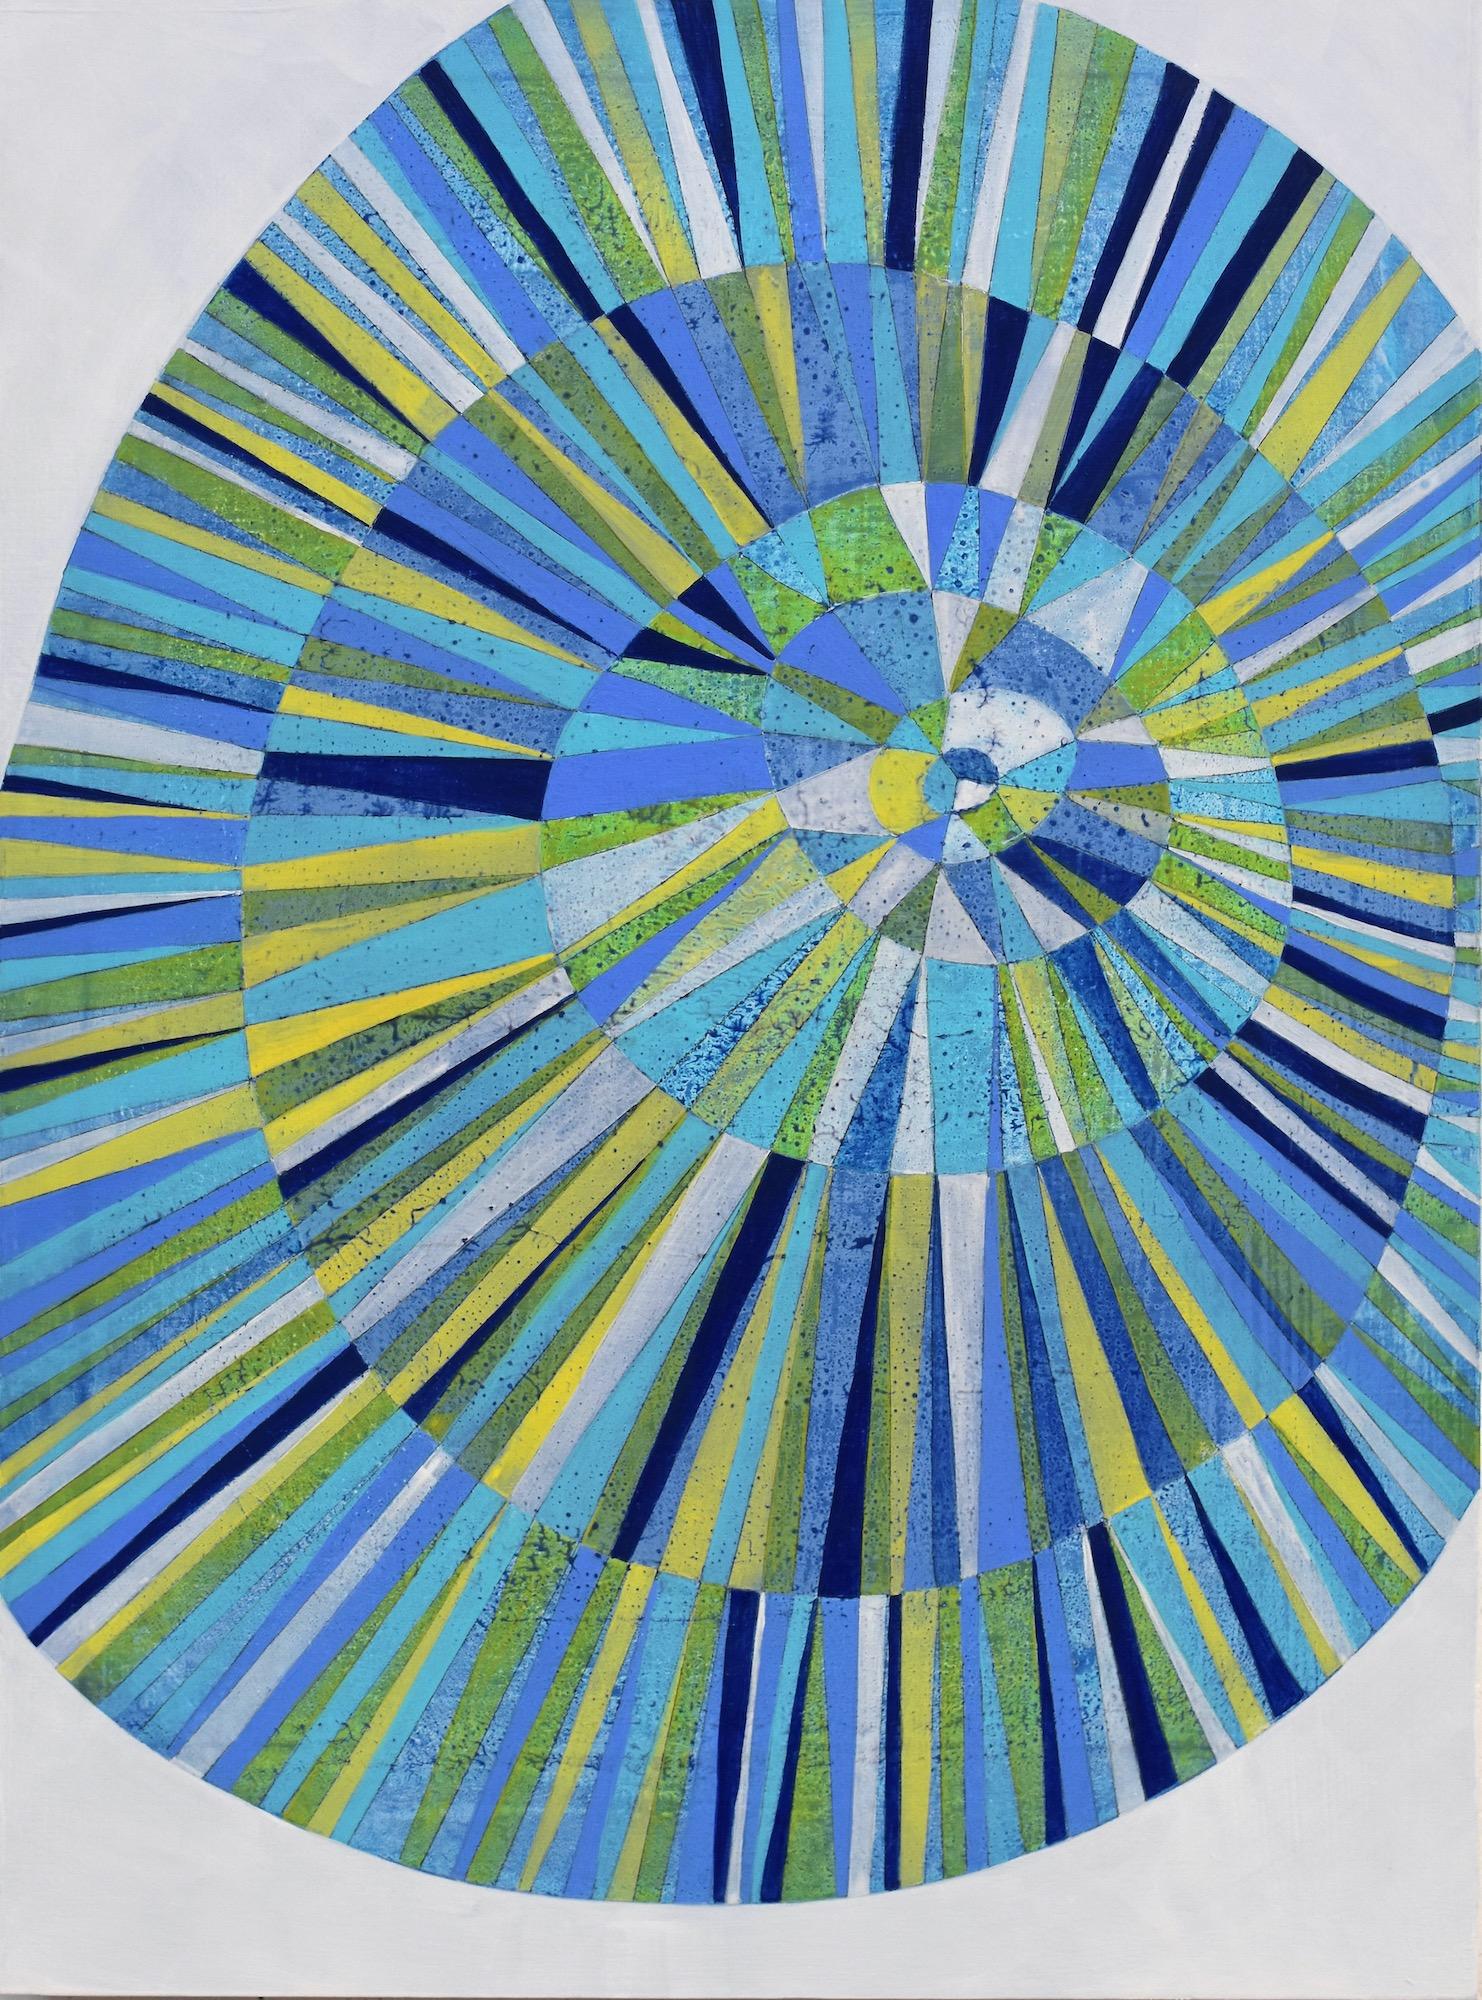 "Influence 6", abstract, teal, blue, yellow, green, spokes, acrylic painting - Painting by Denise Driscoll